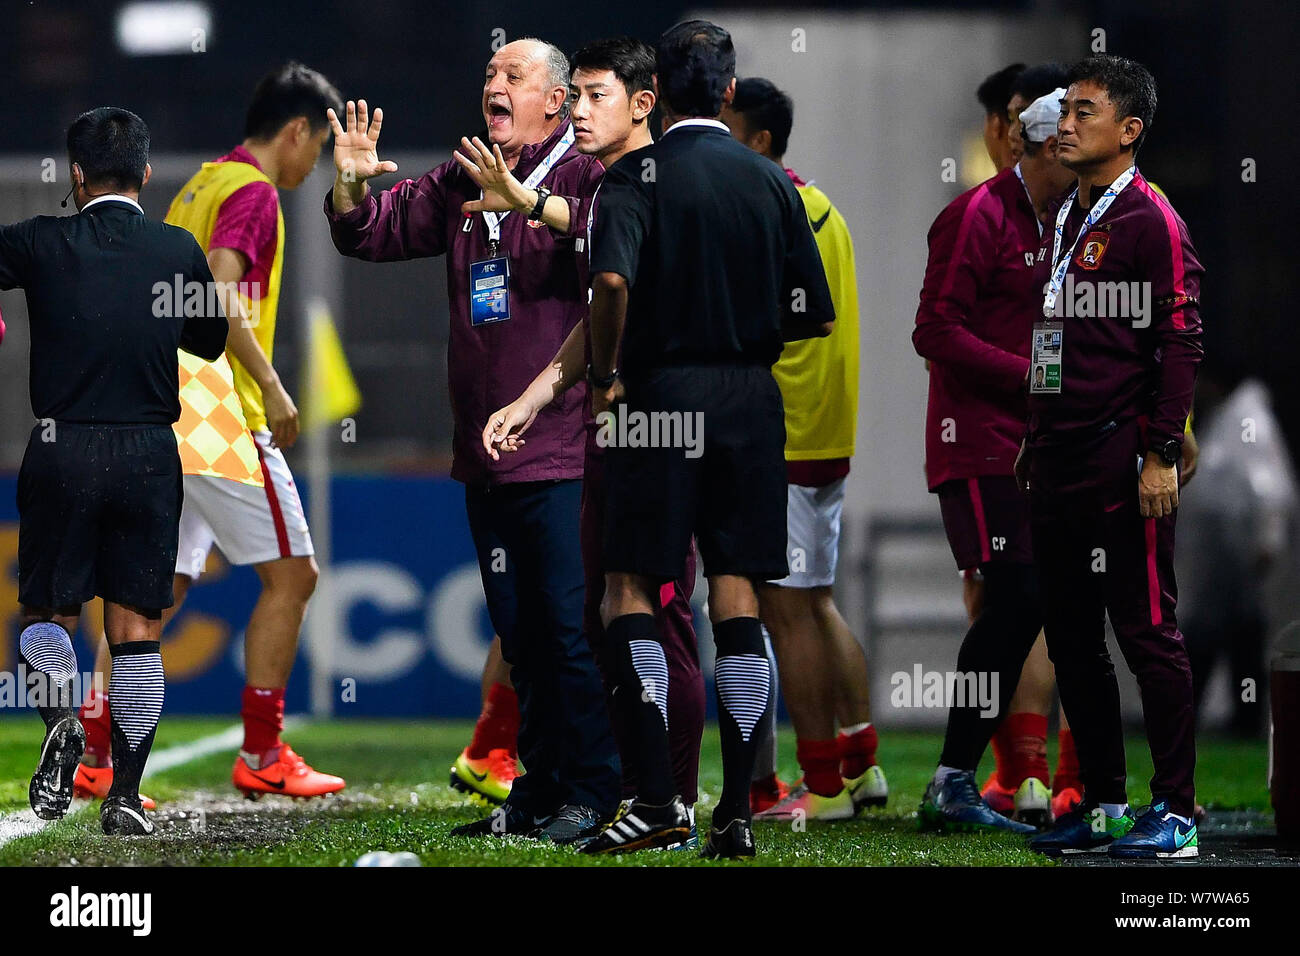 Head coach Luiz Felipe Scolari of China's Guangzhou Evergrande F.C. reacts as he watches his players competing against Hong Kong's Eastern SC in a Gro Stock Photo